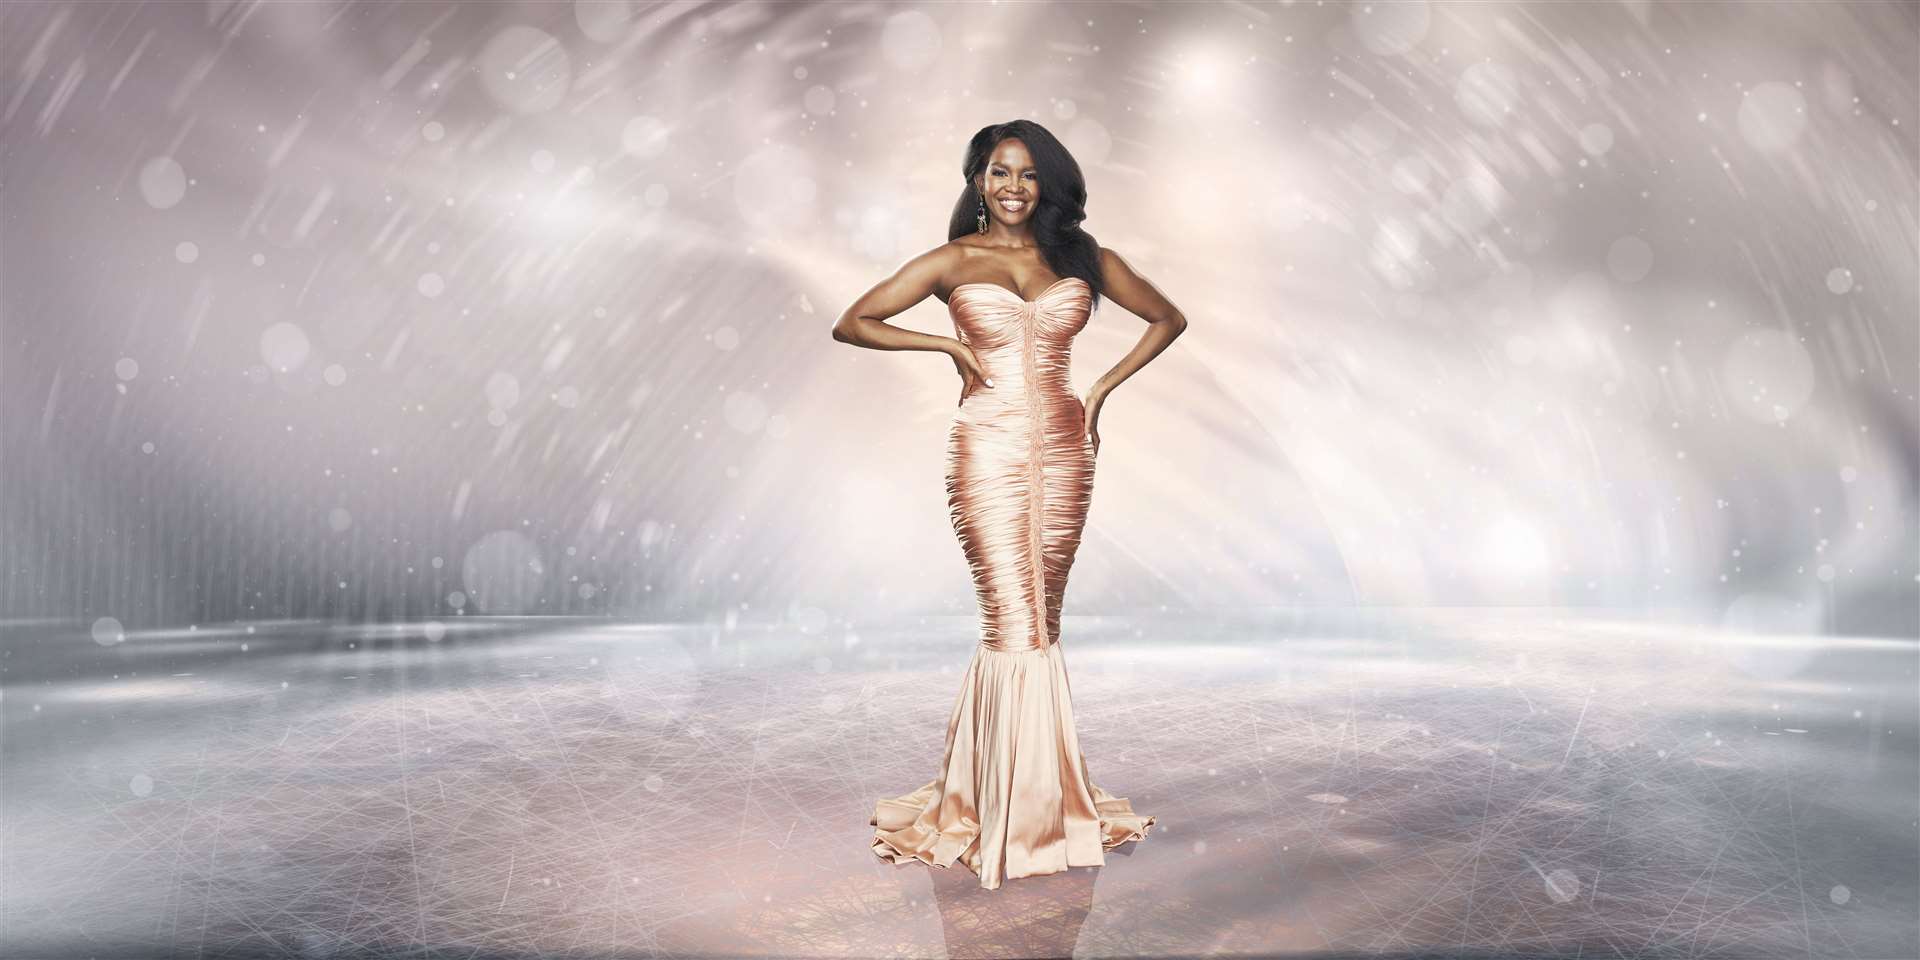 Oti swapped the ballroom for the skating rink earlier this year as she joined Dancing on Ice. Picture: ITV